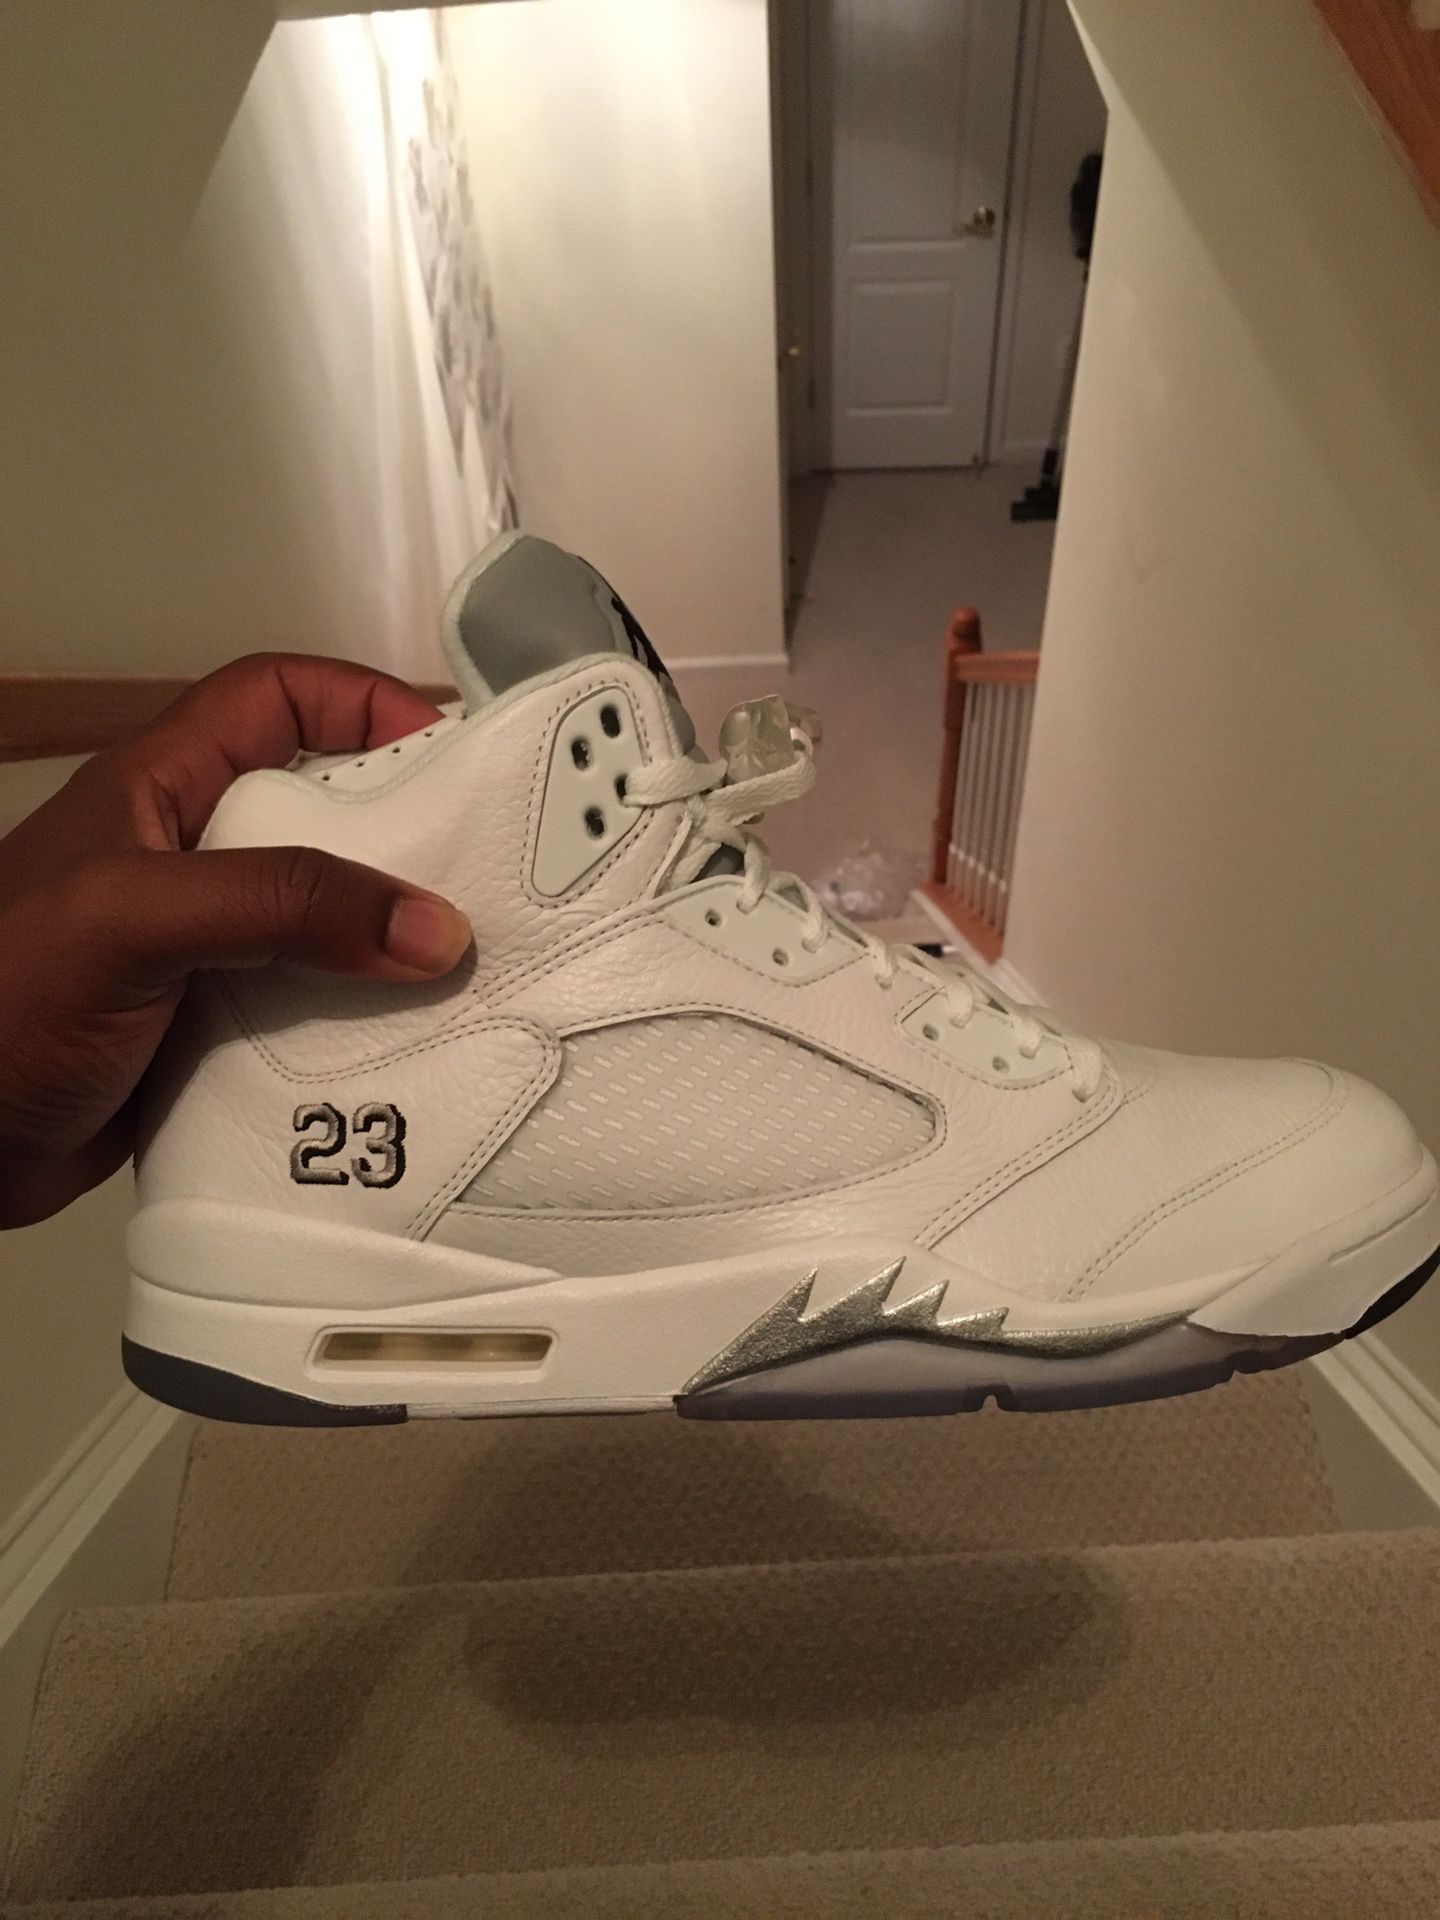 Jordan Retro 5 (DeadStock) these selling off 230 on stockX (SIZE 12)